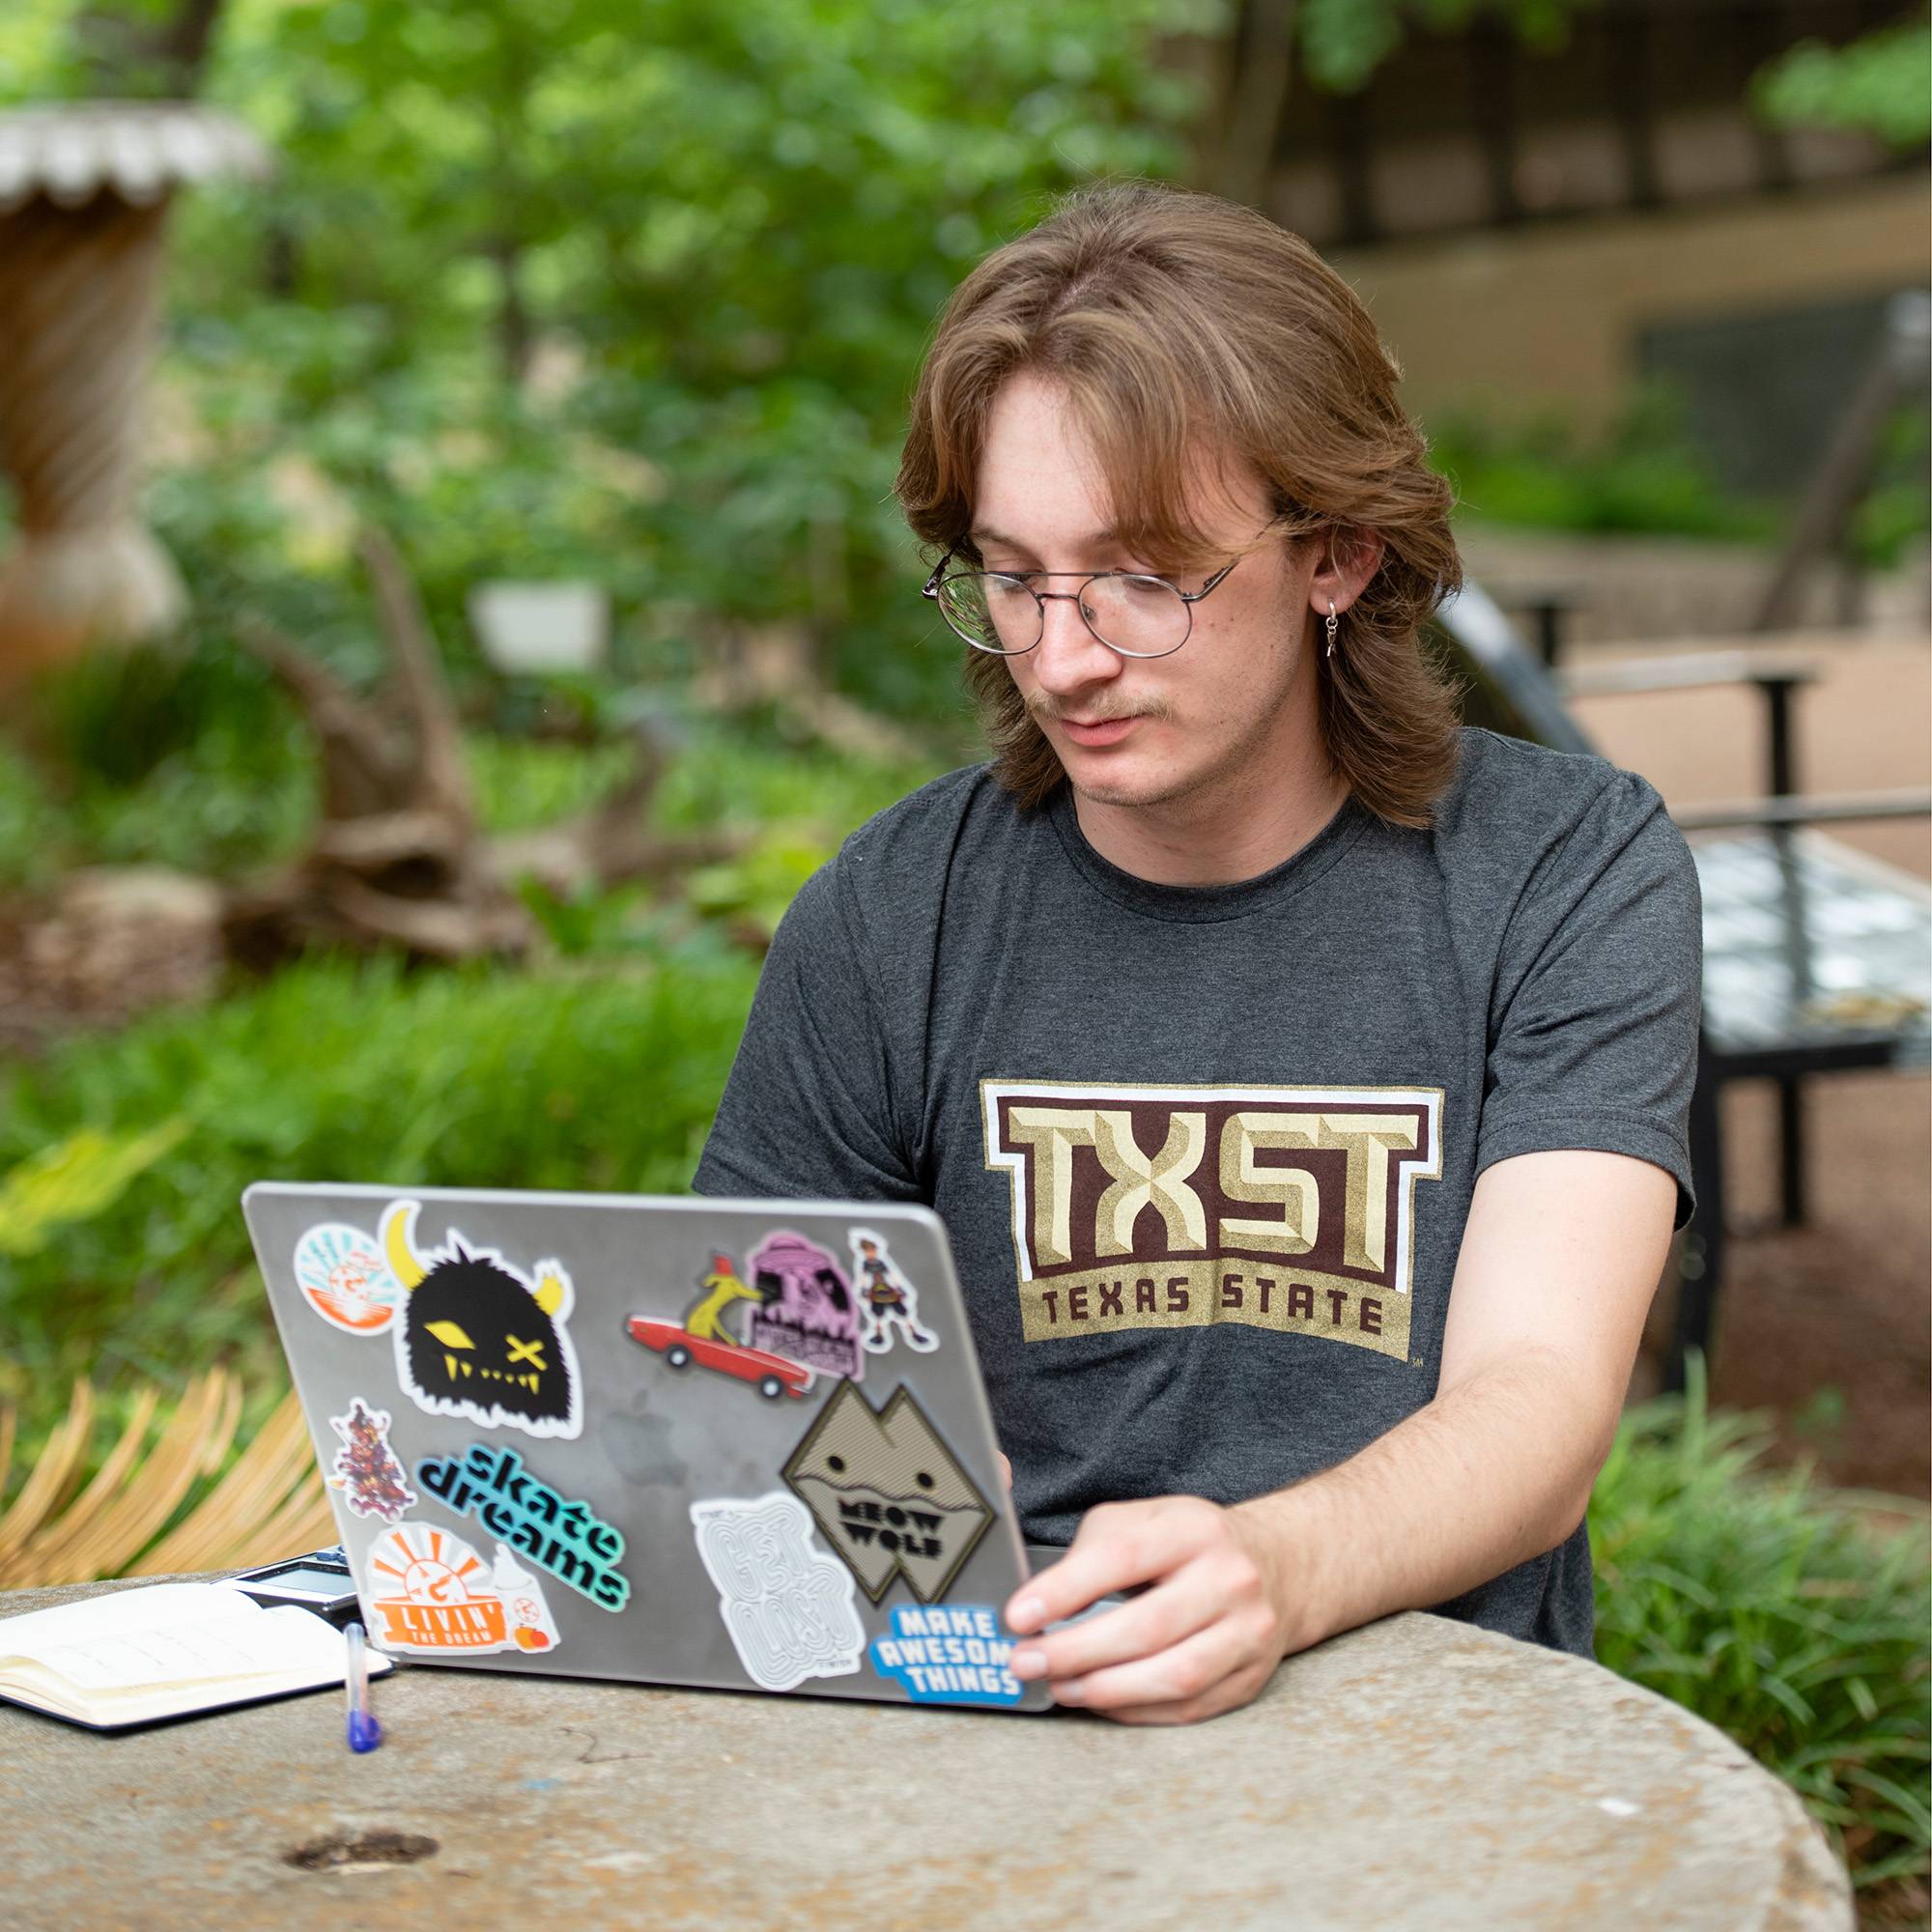 Student with Texas State shirt on computer